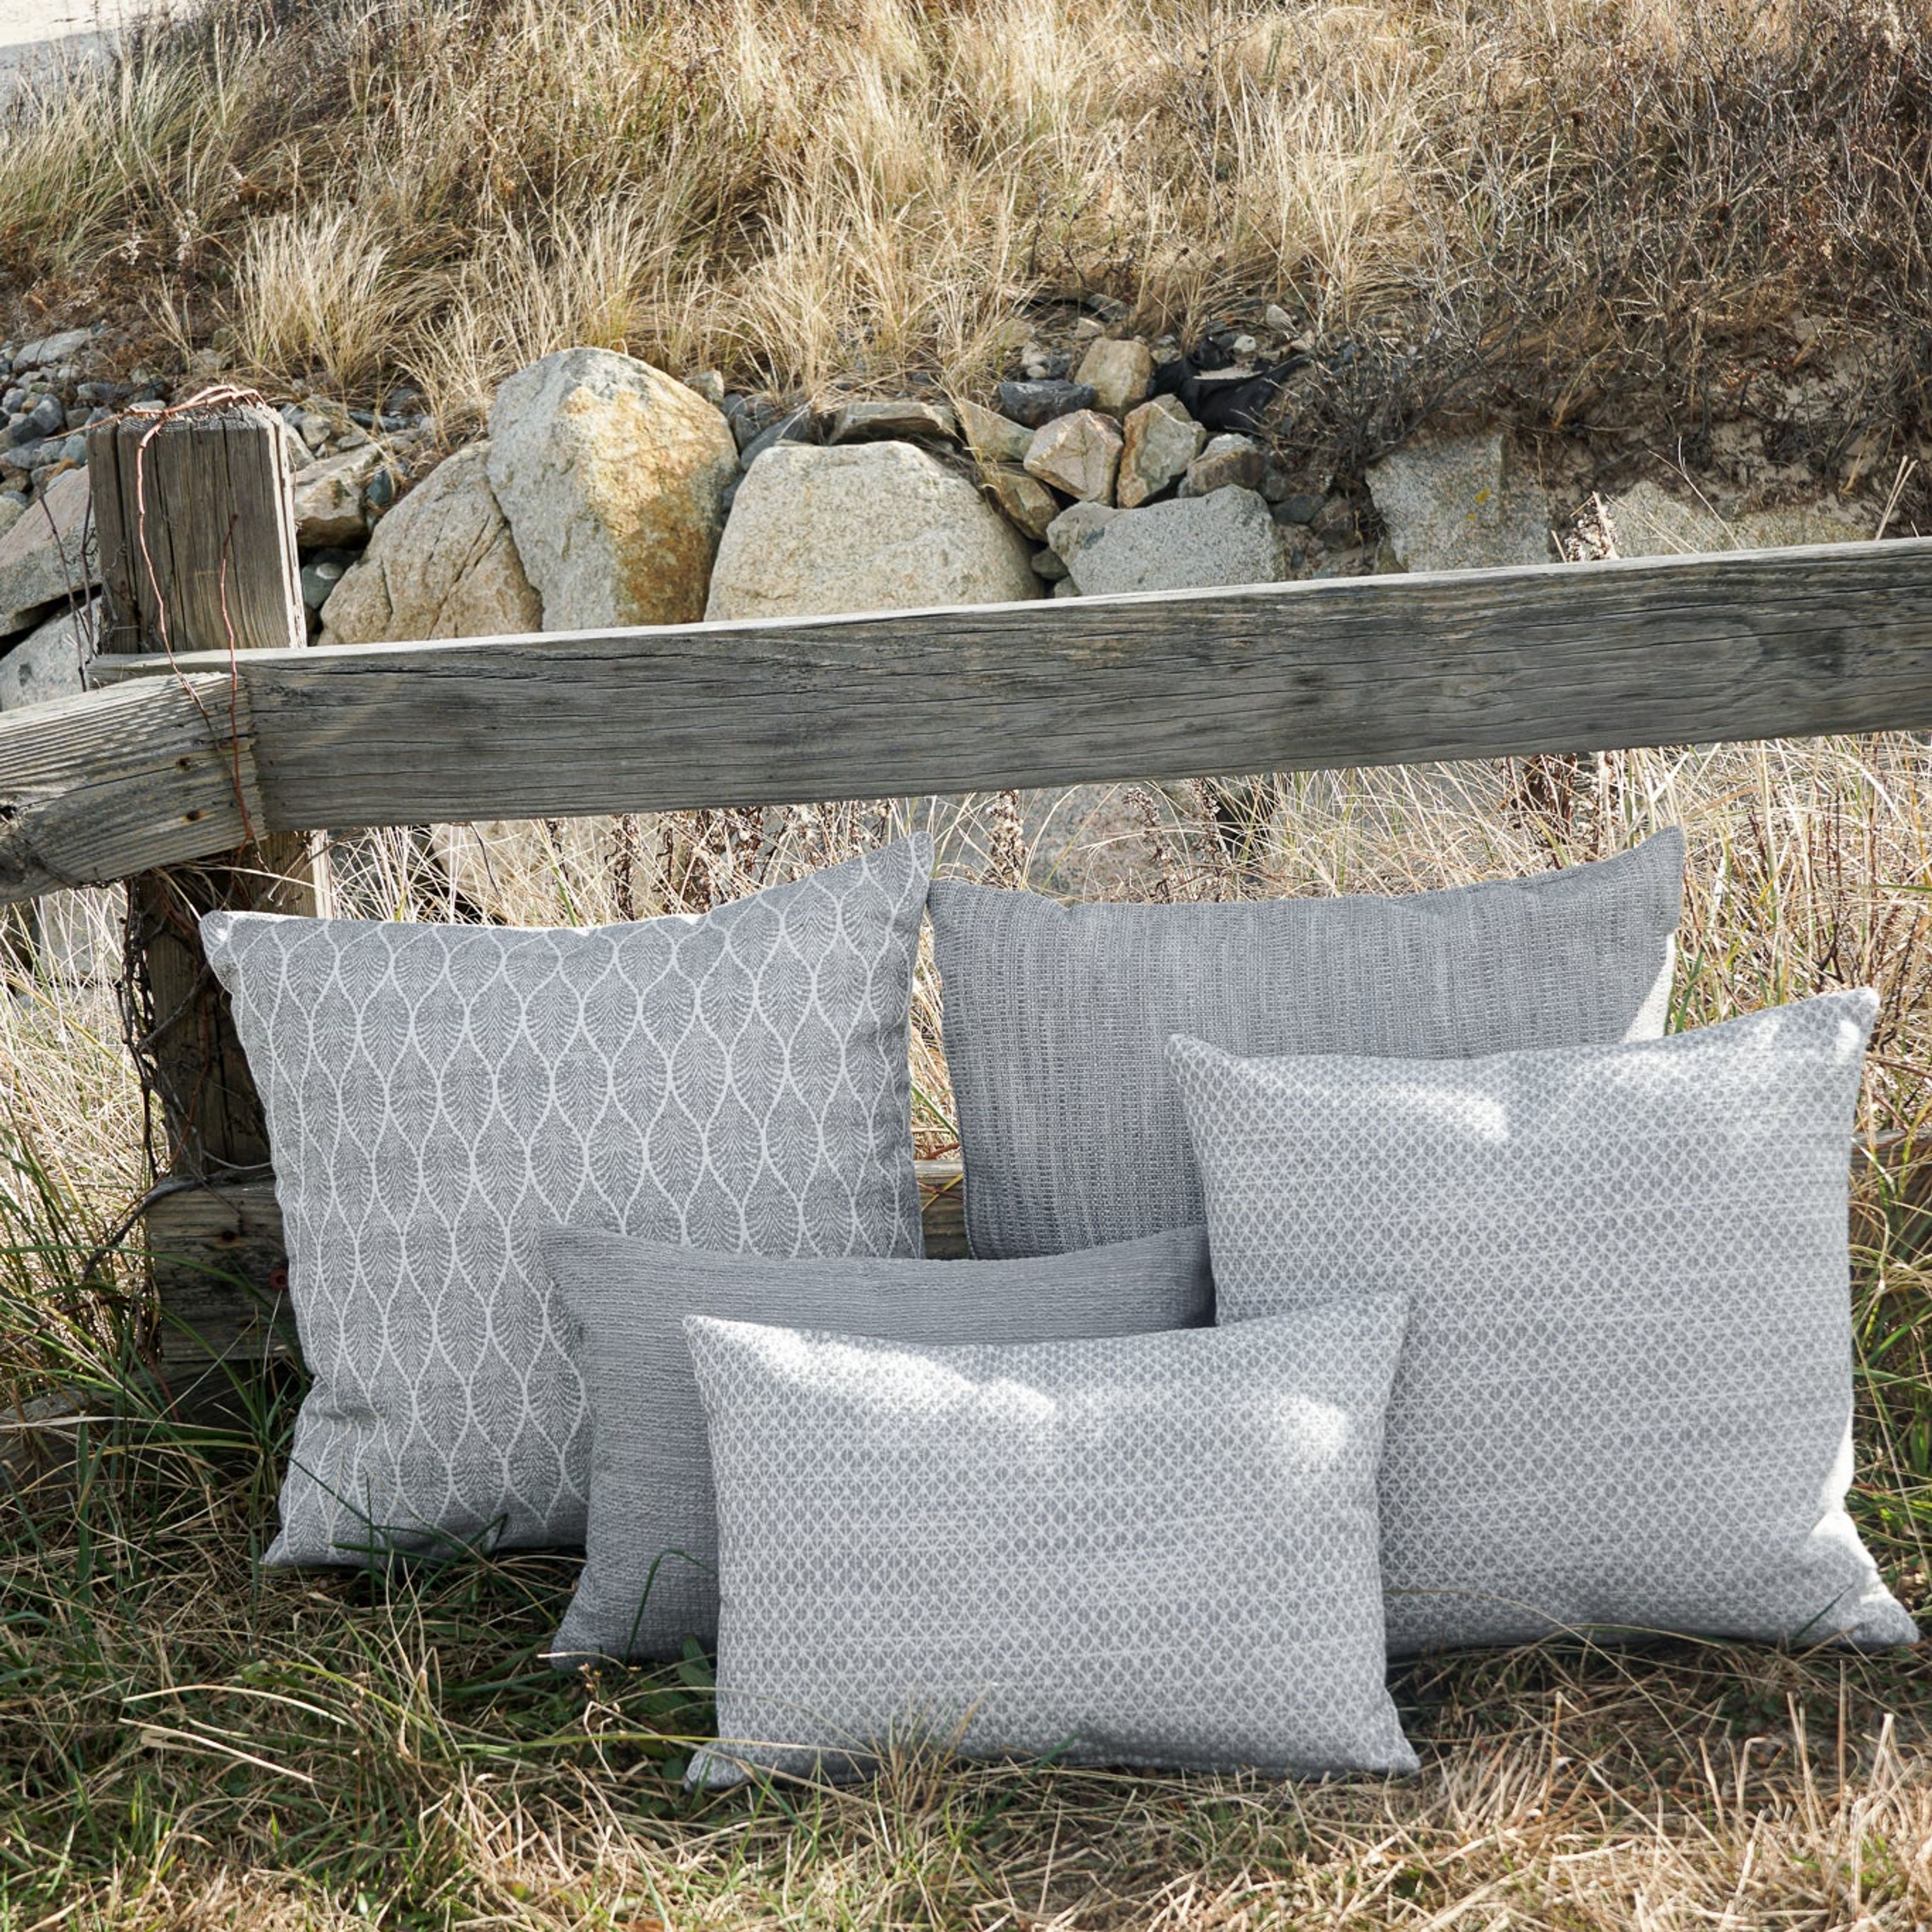 Seaside Smooth Grey Indoor and Outdoor Pillow